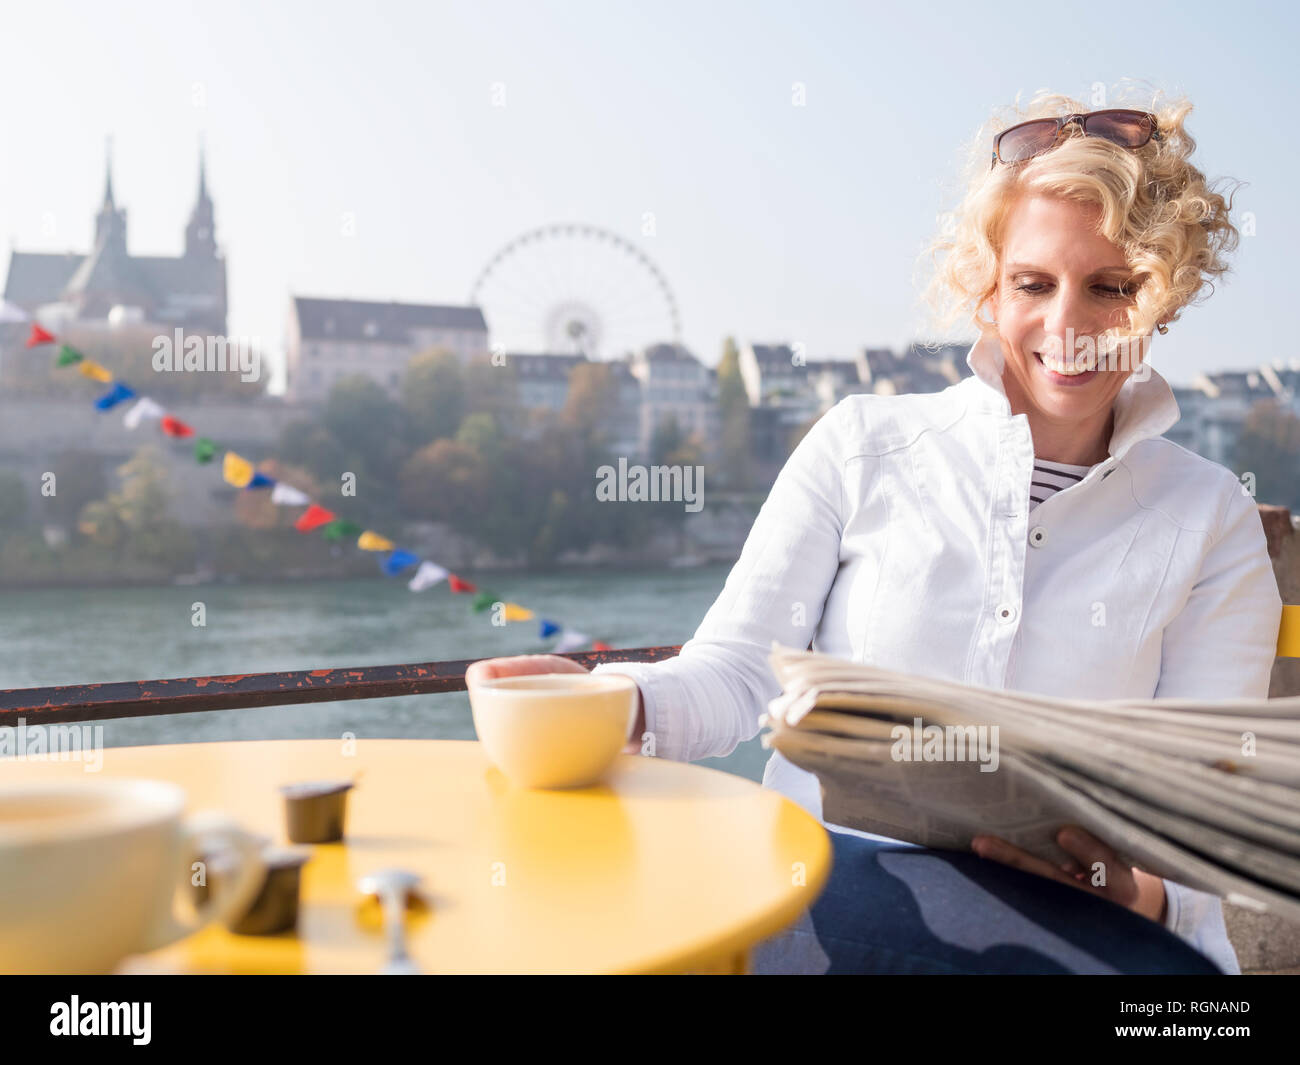 Switzerland, Basel, smiling woman reading newspaper in a street cafe at River Rhine Stock Photo